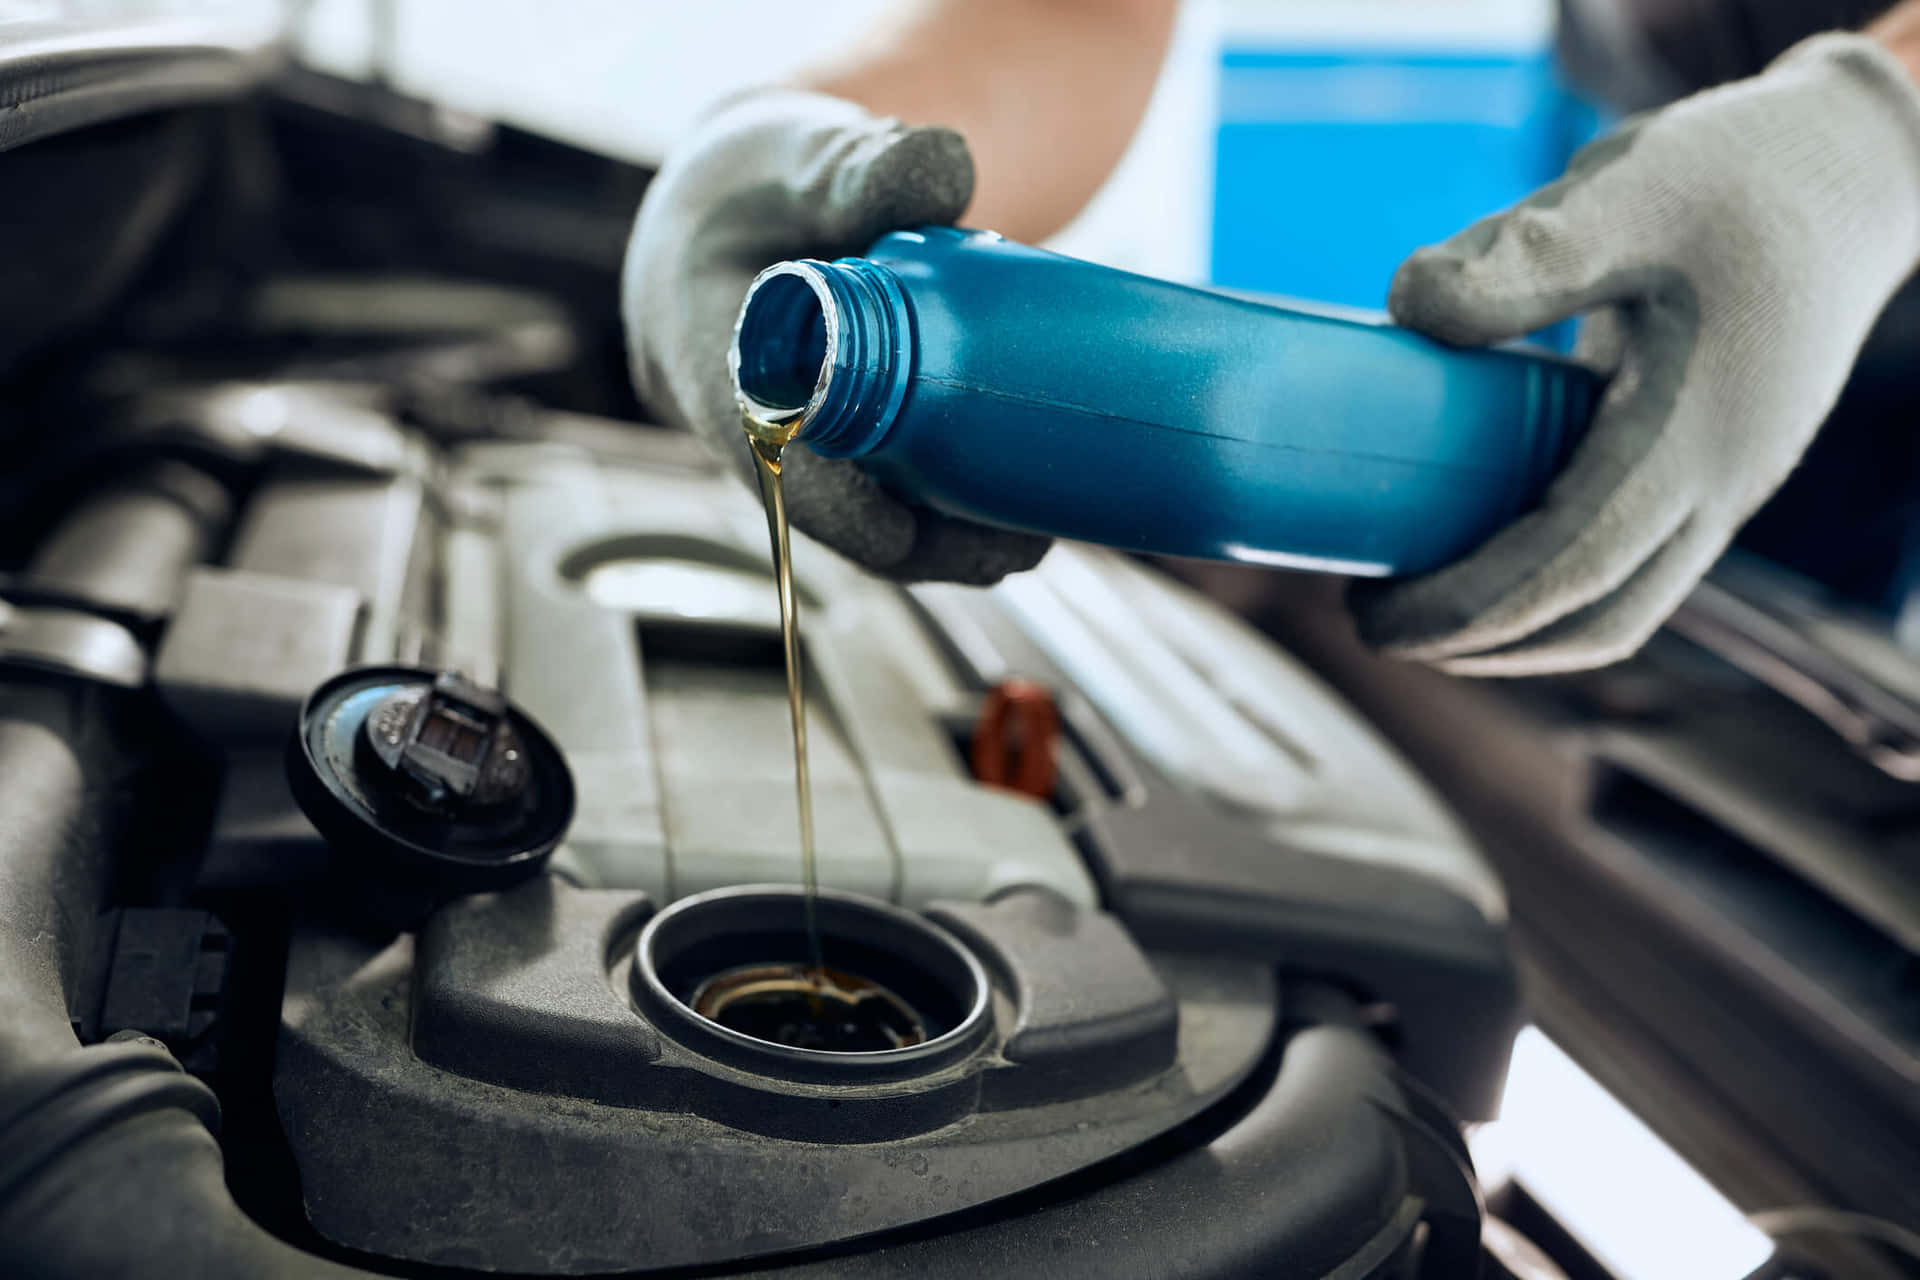 Keep Your Vehicle Tuned Up With Fresh Engine Oil